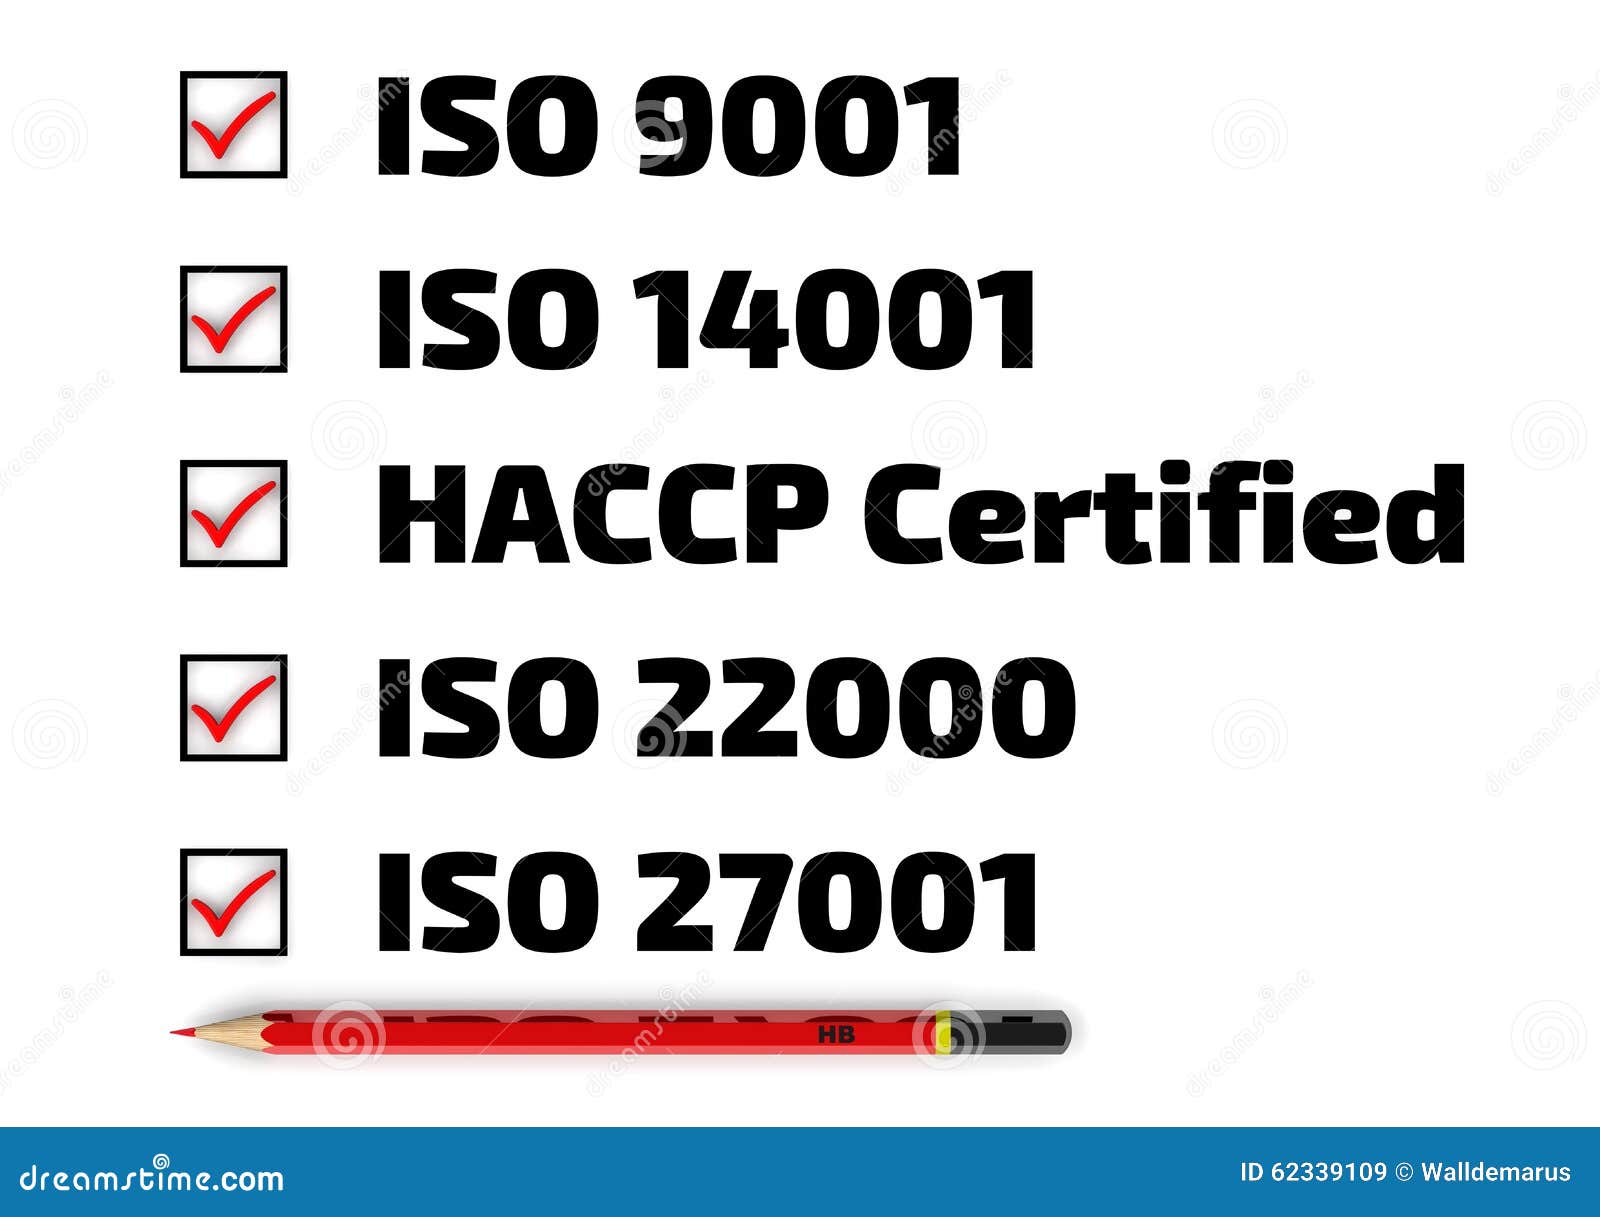 list-iso-standards-haccp-red-pencil-chec